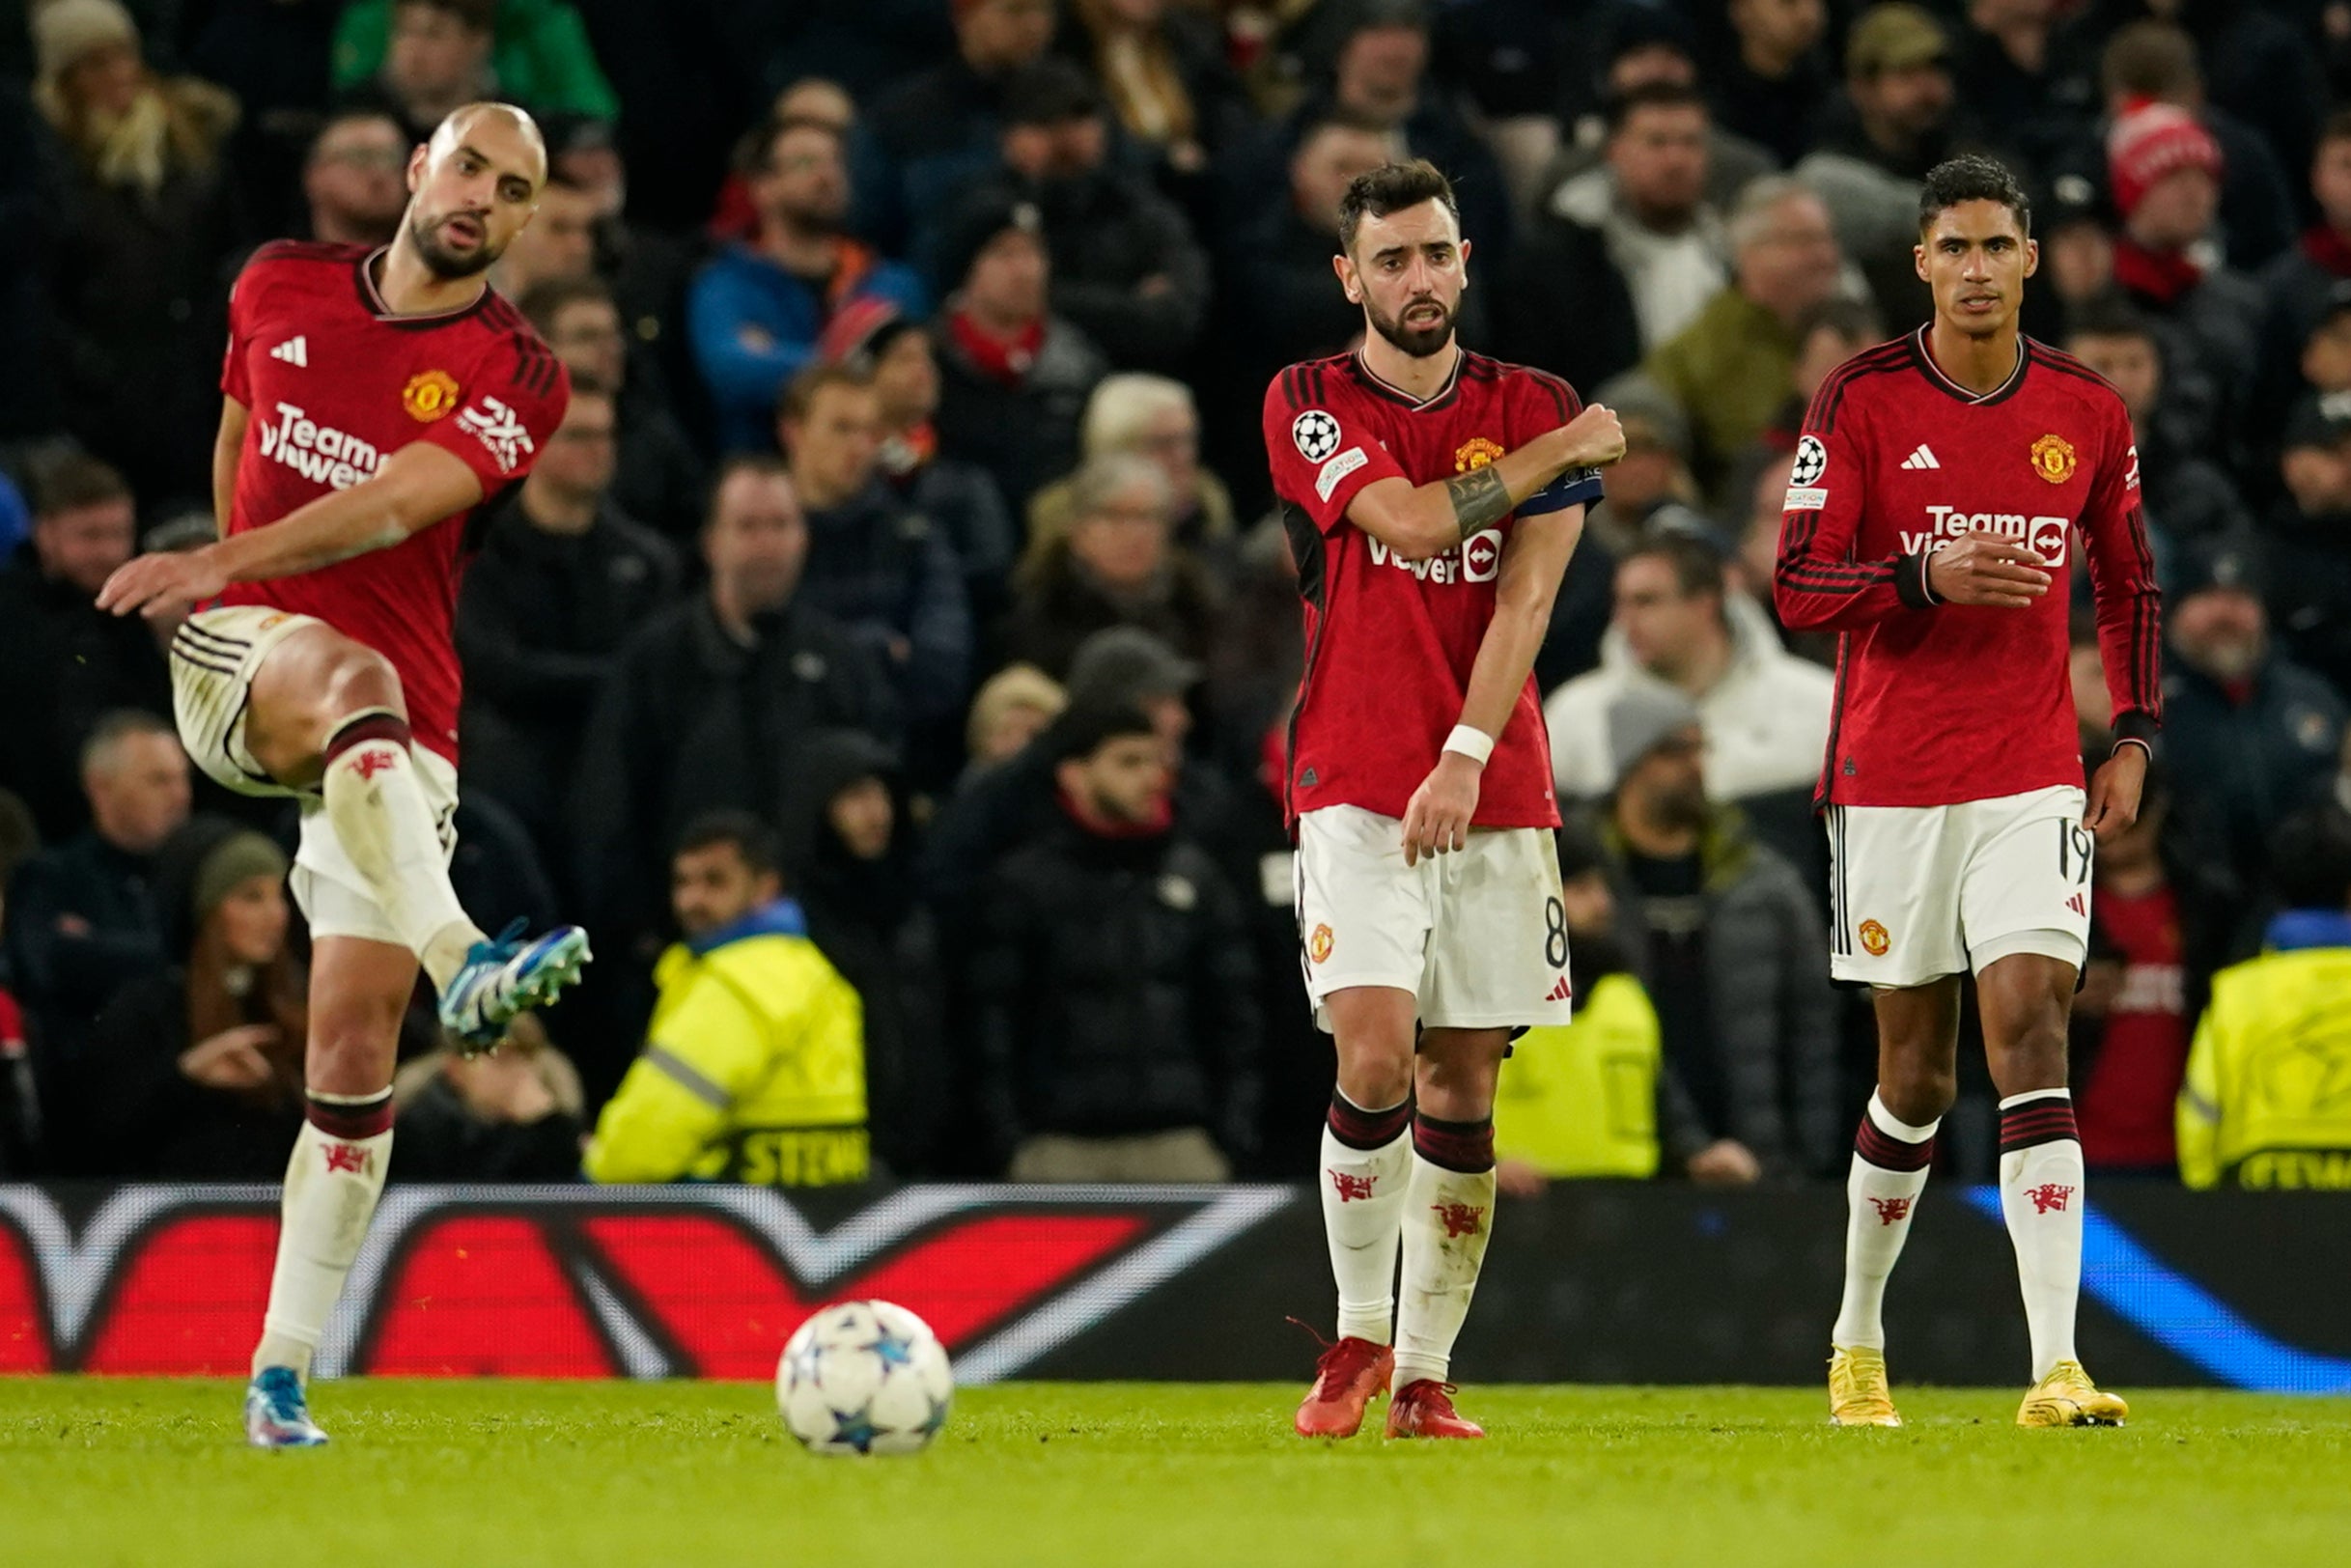 Manchester United have crashed out of Europe and the Carabao Cup